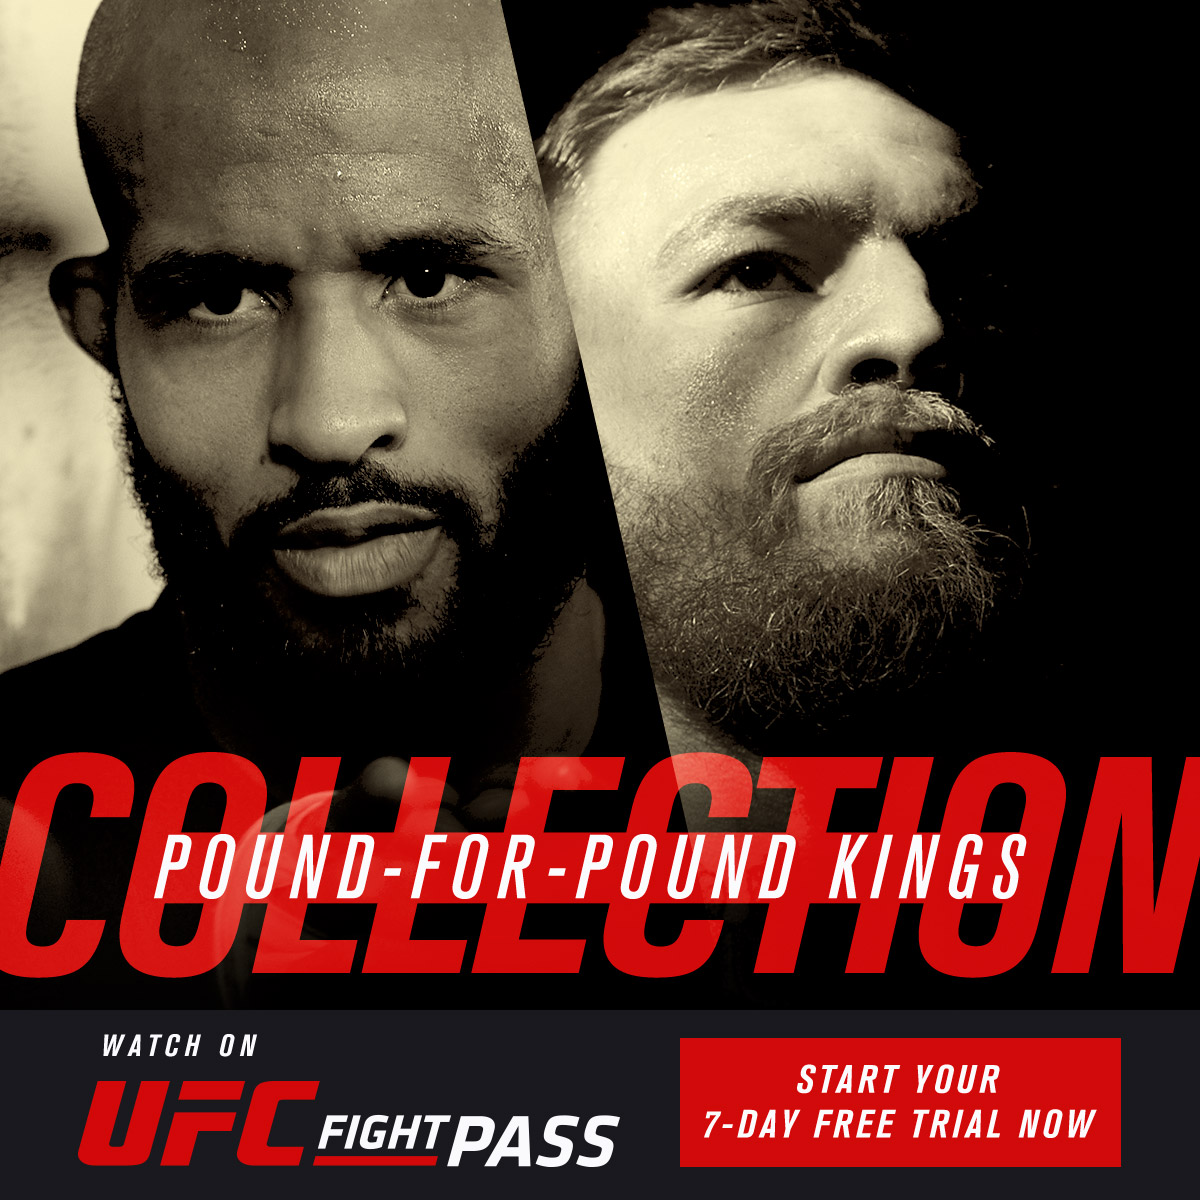 UFC FIGHT PASS celebrates McGregor, Mighty Mouse MMA